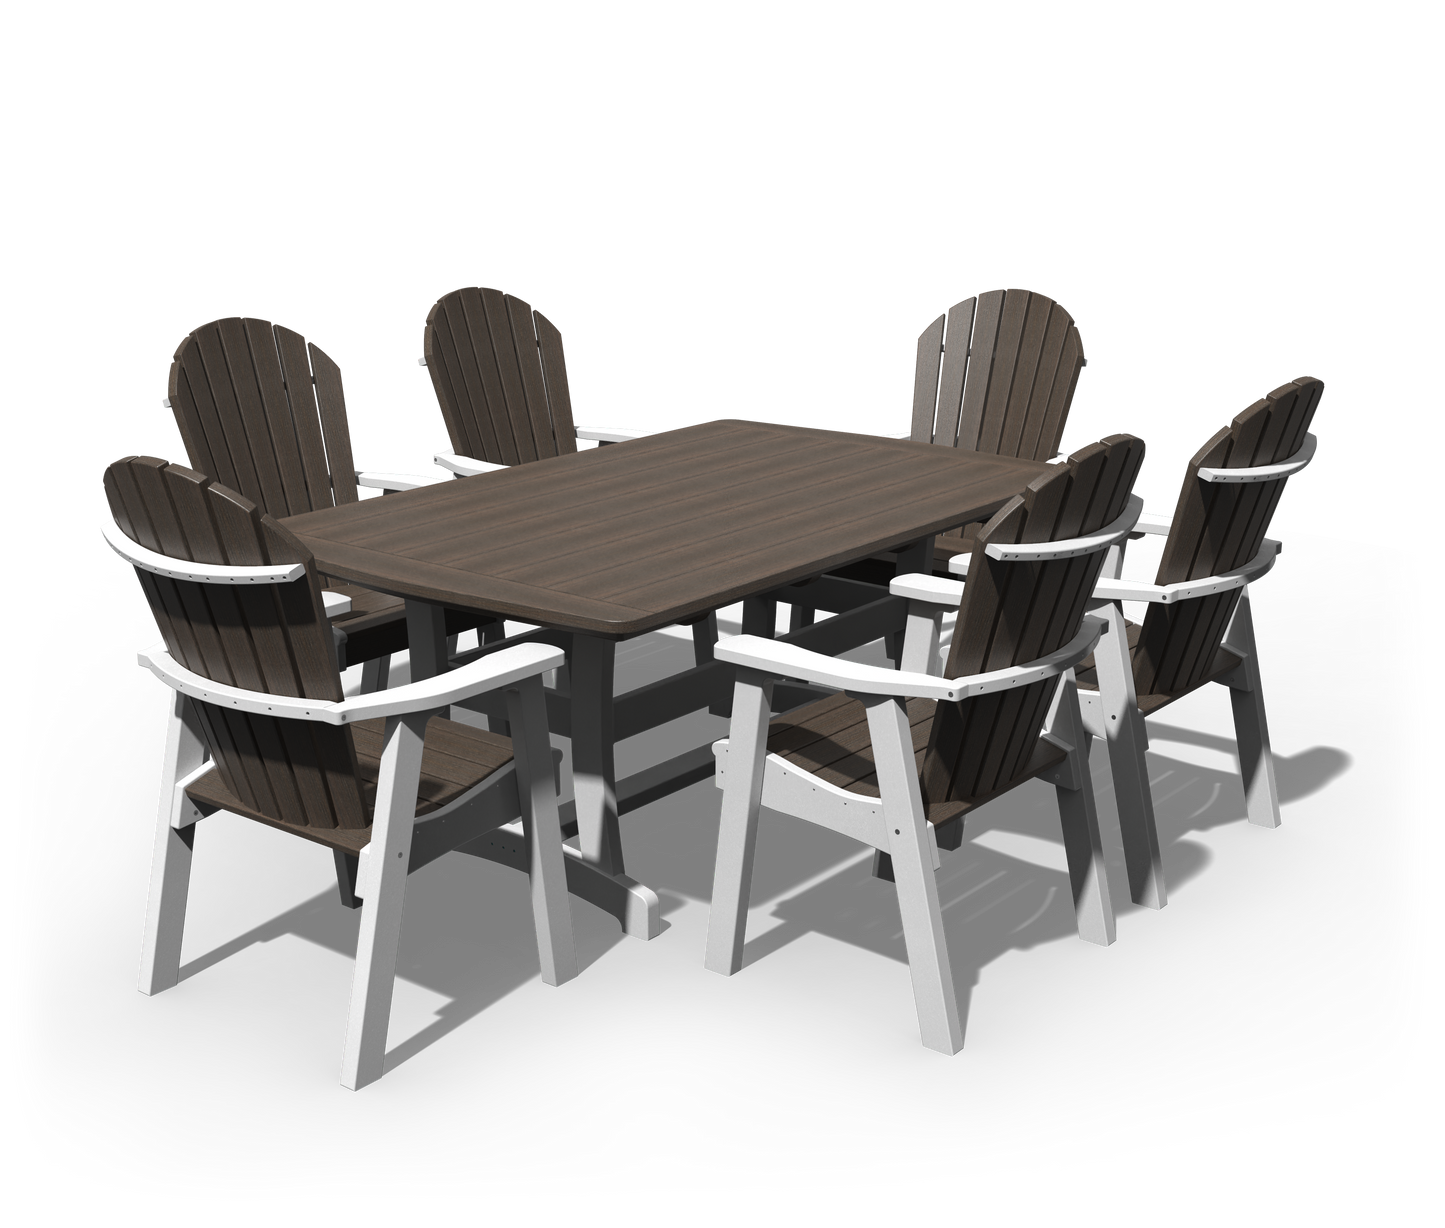 Patiova Recycled Plastic 4′ x 6′ Adirondack 7 Piece Dining Set  - LEAD TIME TO SHIP 3 Weeks